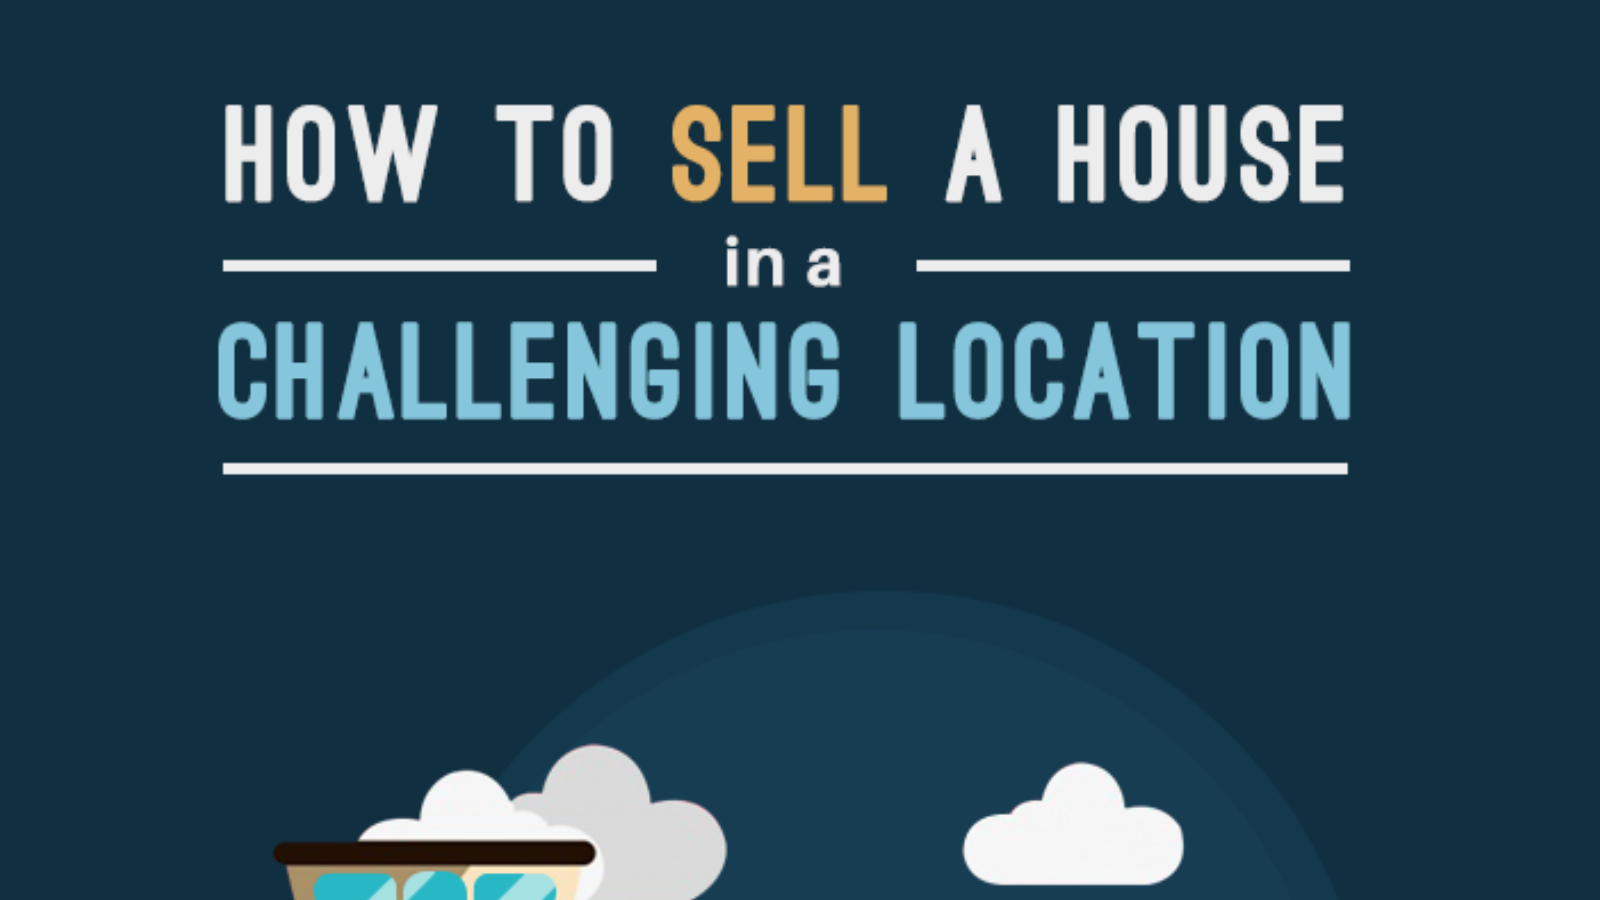 7 Tips To Sell A Good House From A Challenging Location